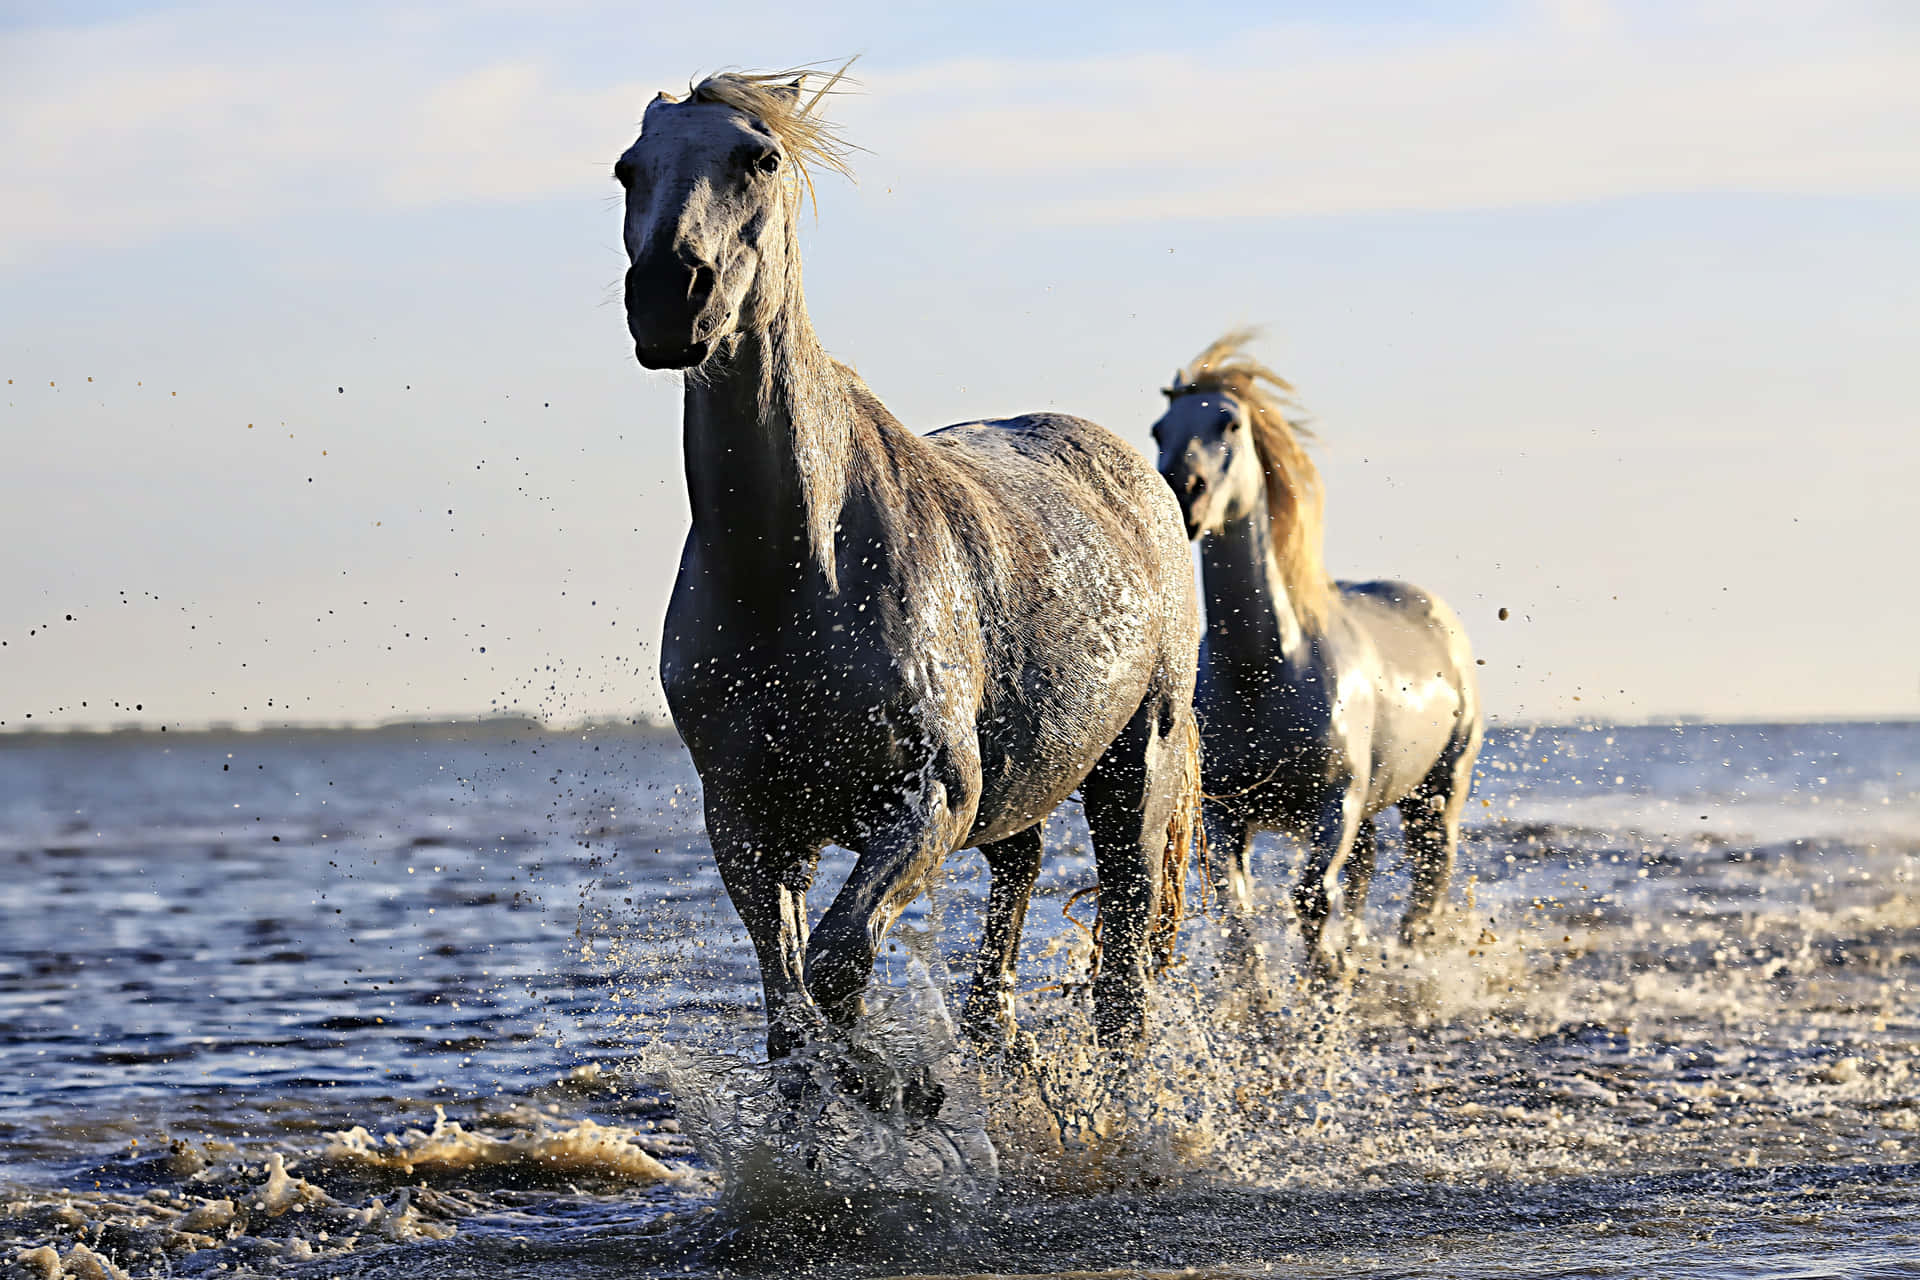 Photographer captures the majesty of beautiful horses in a stunning landscape